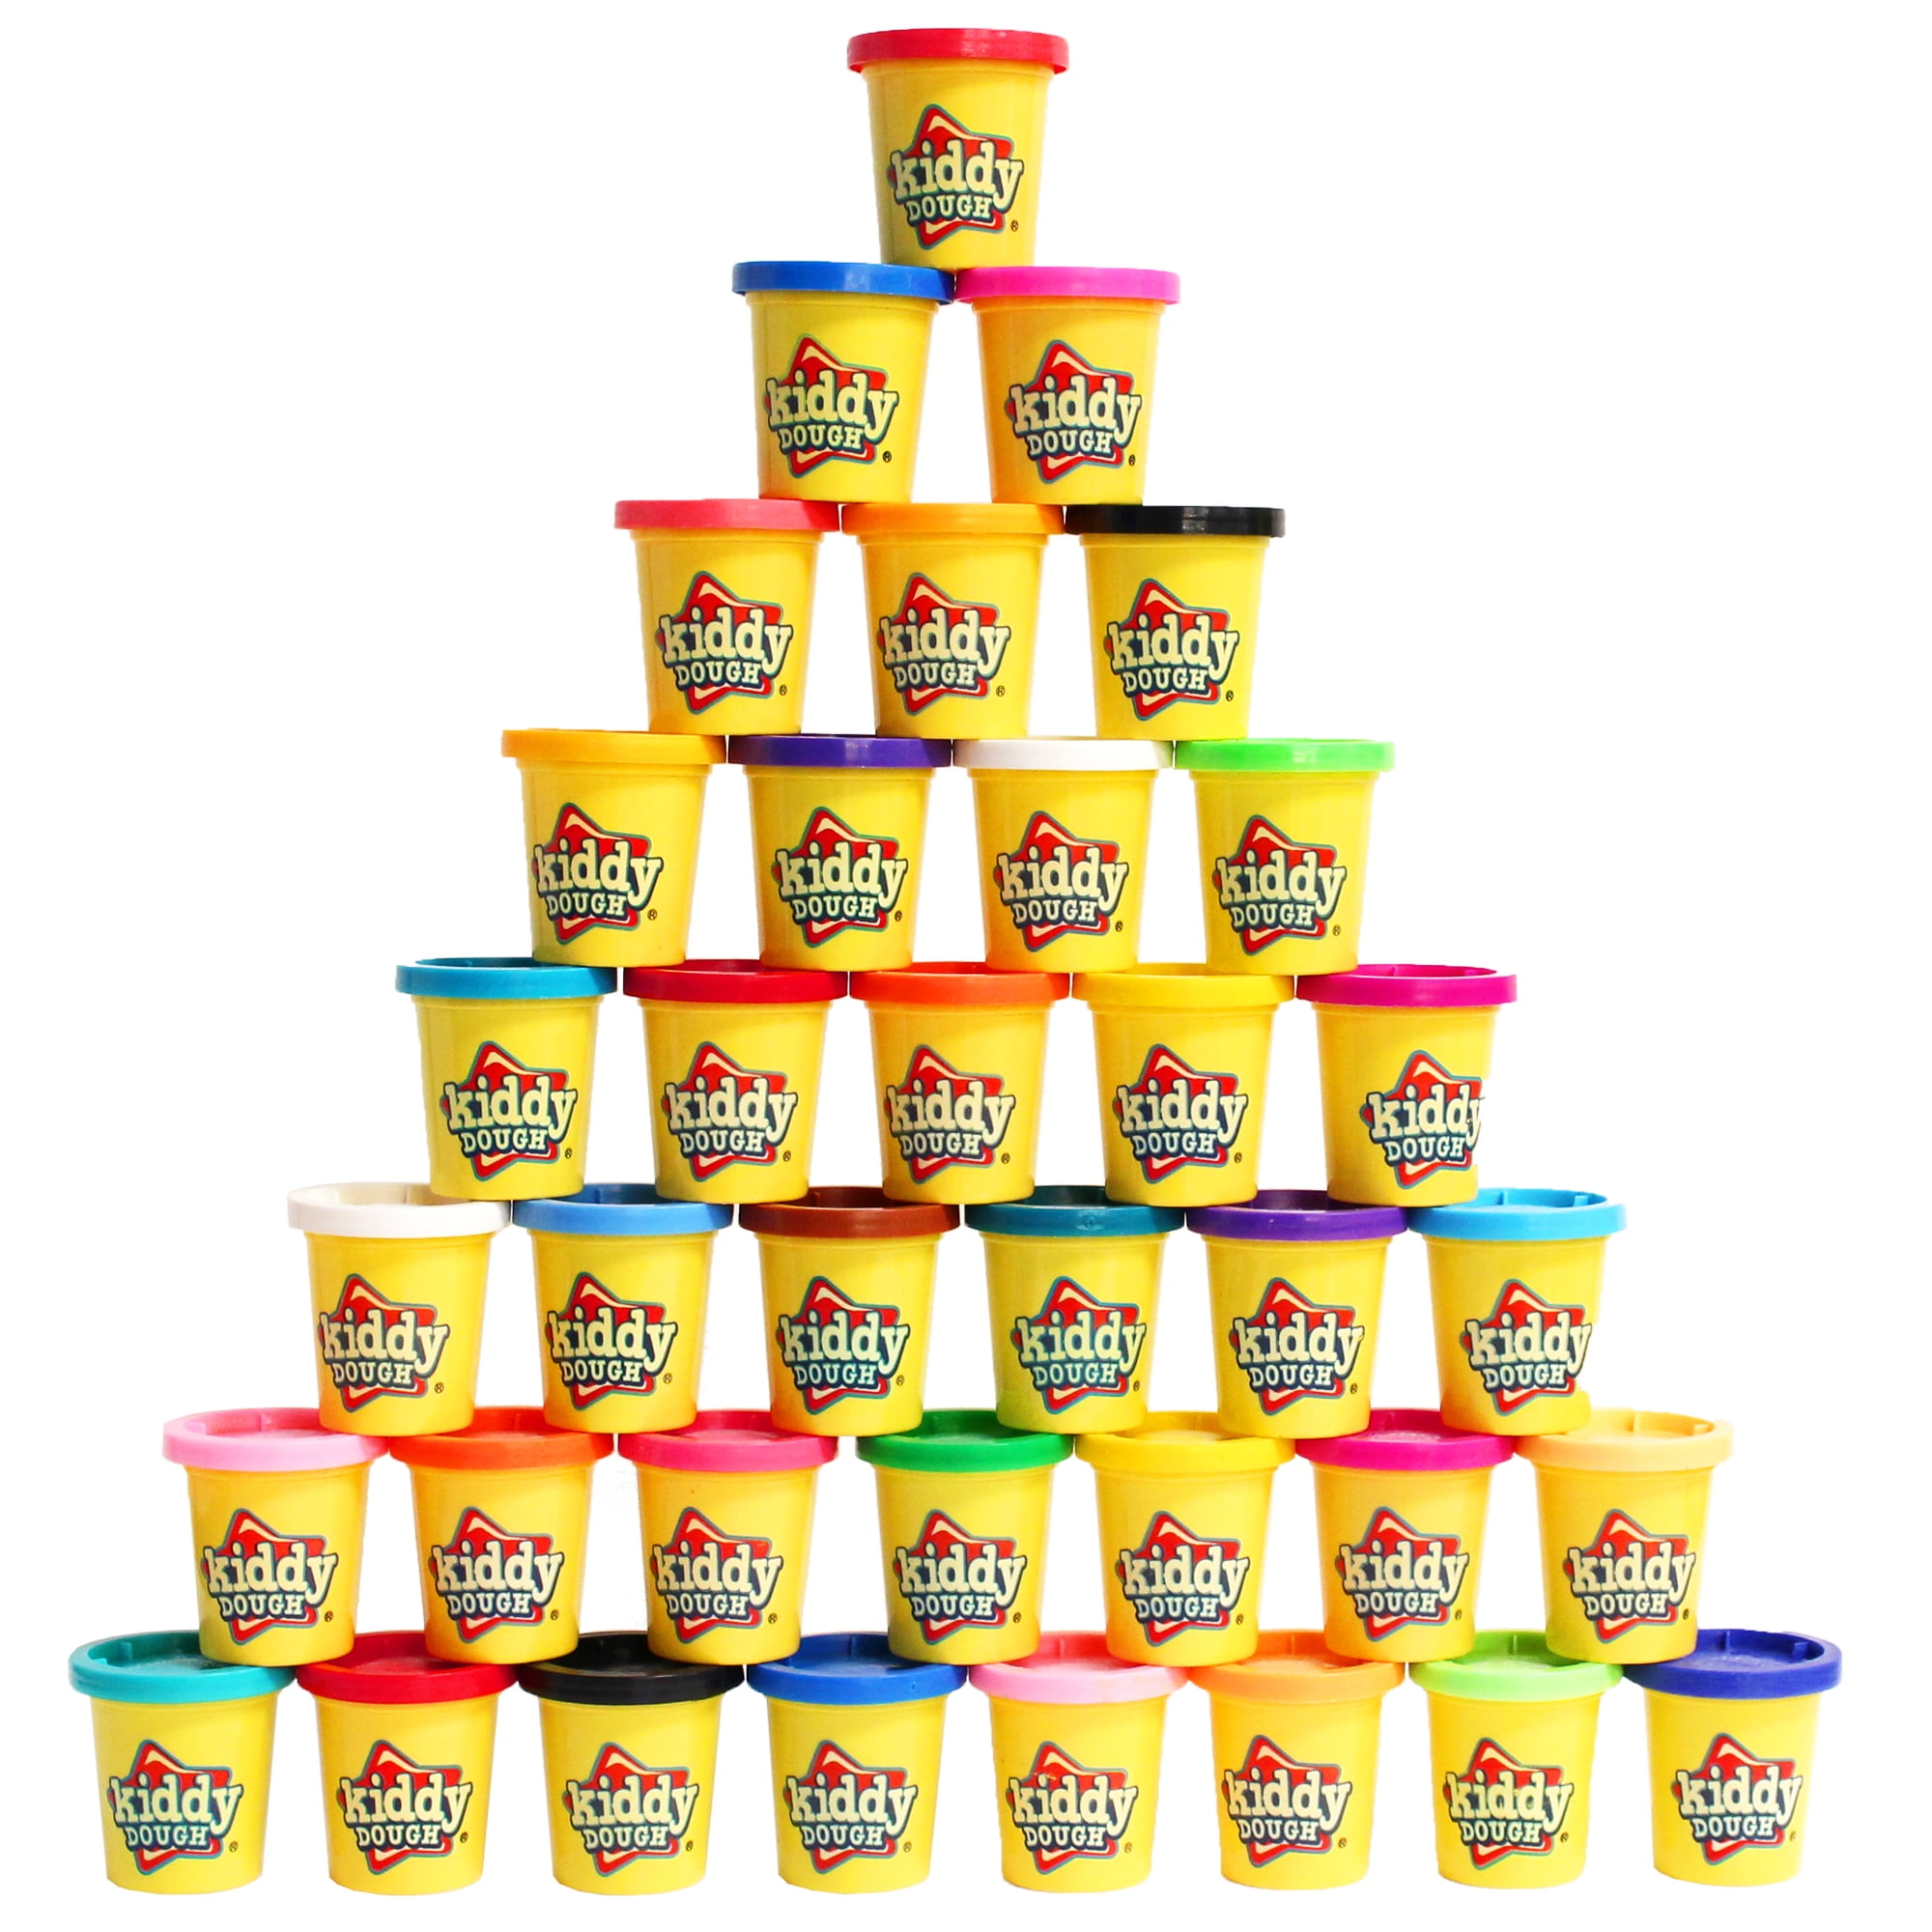 Play-Doh Modeling Compound 36 Pack Case of Colors, Party Favors, Non-Toxic,  Assorted Colors, 3 Oz Cans, Kids Easter Basket Stuffers ( Exclusive)